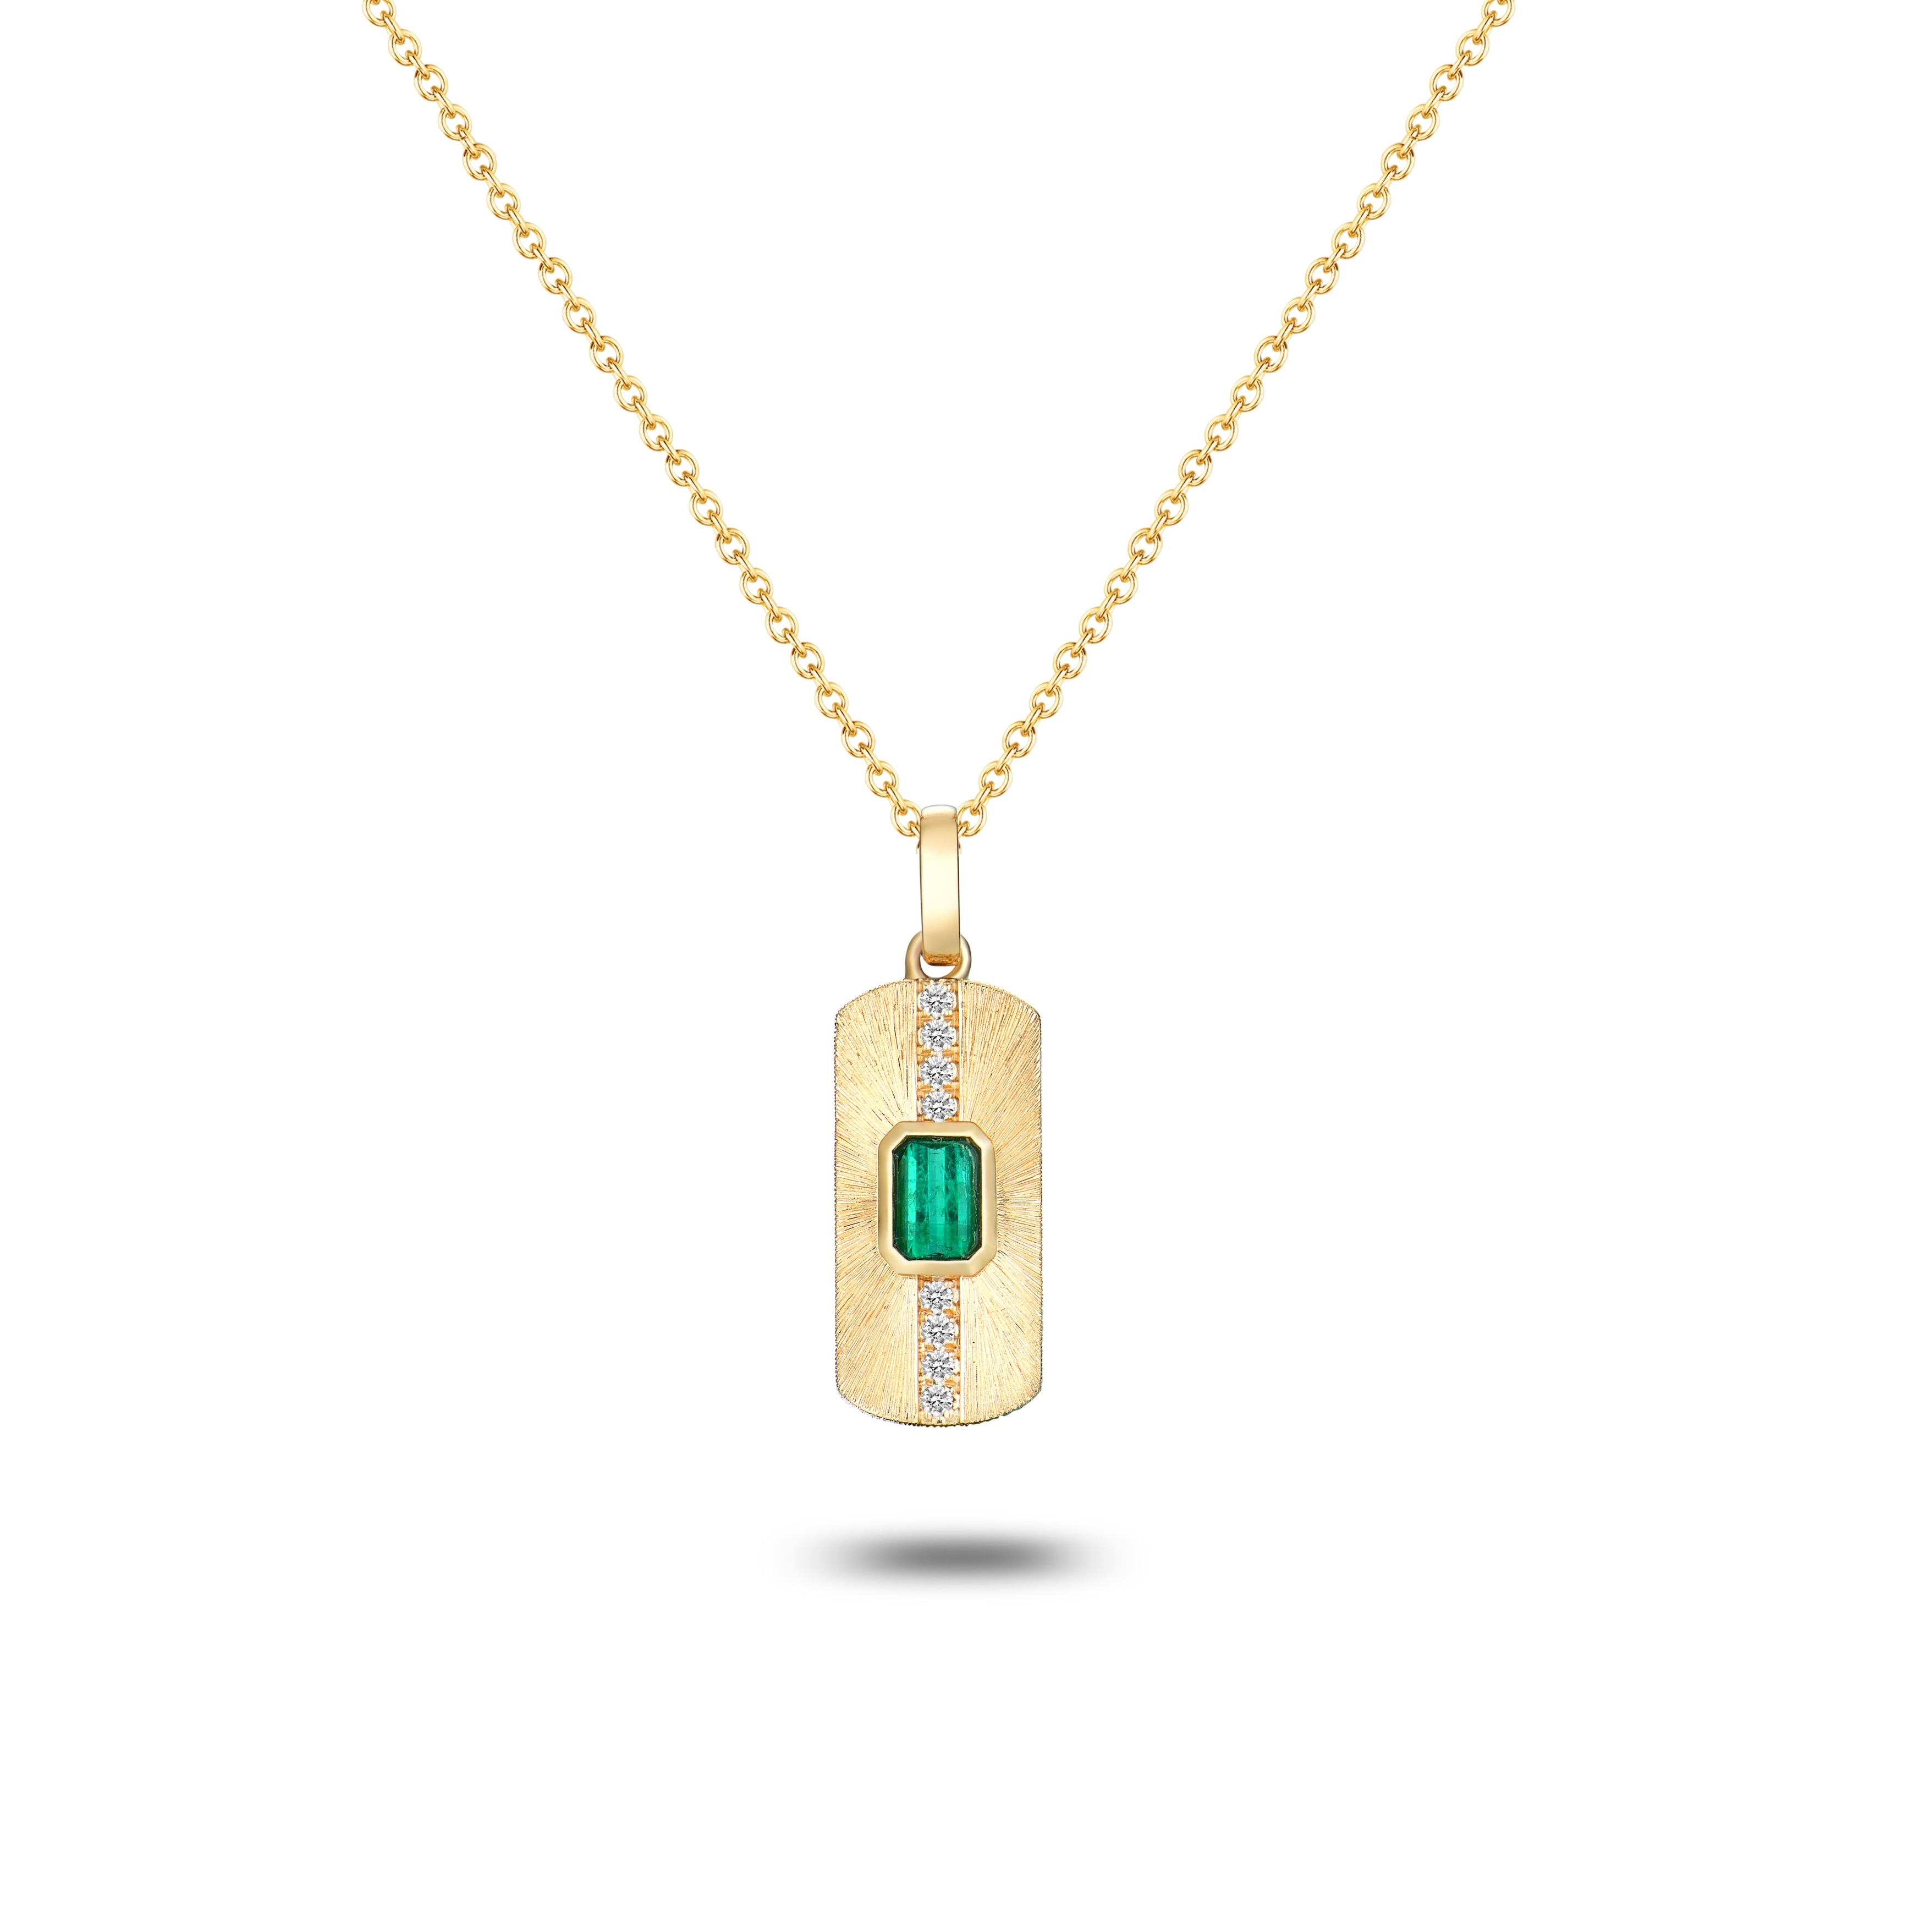 Buy 3.0cts Sterling Silver, Natural Emerald Necklace, Dark Green Emerald  Pendant,emerald Cut Necklace,natural Emerald Jewelry May Birthstone Online  in India - Etsy